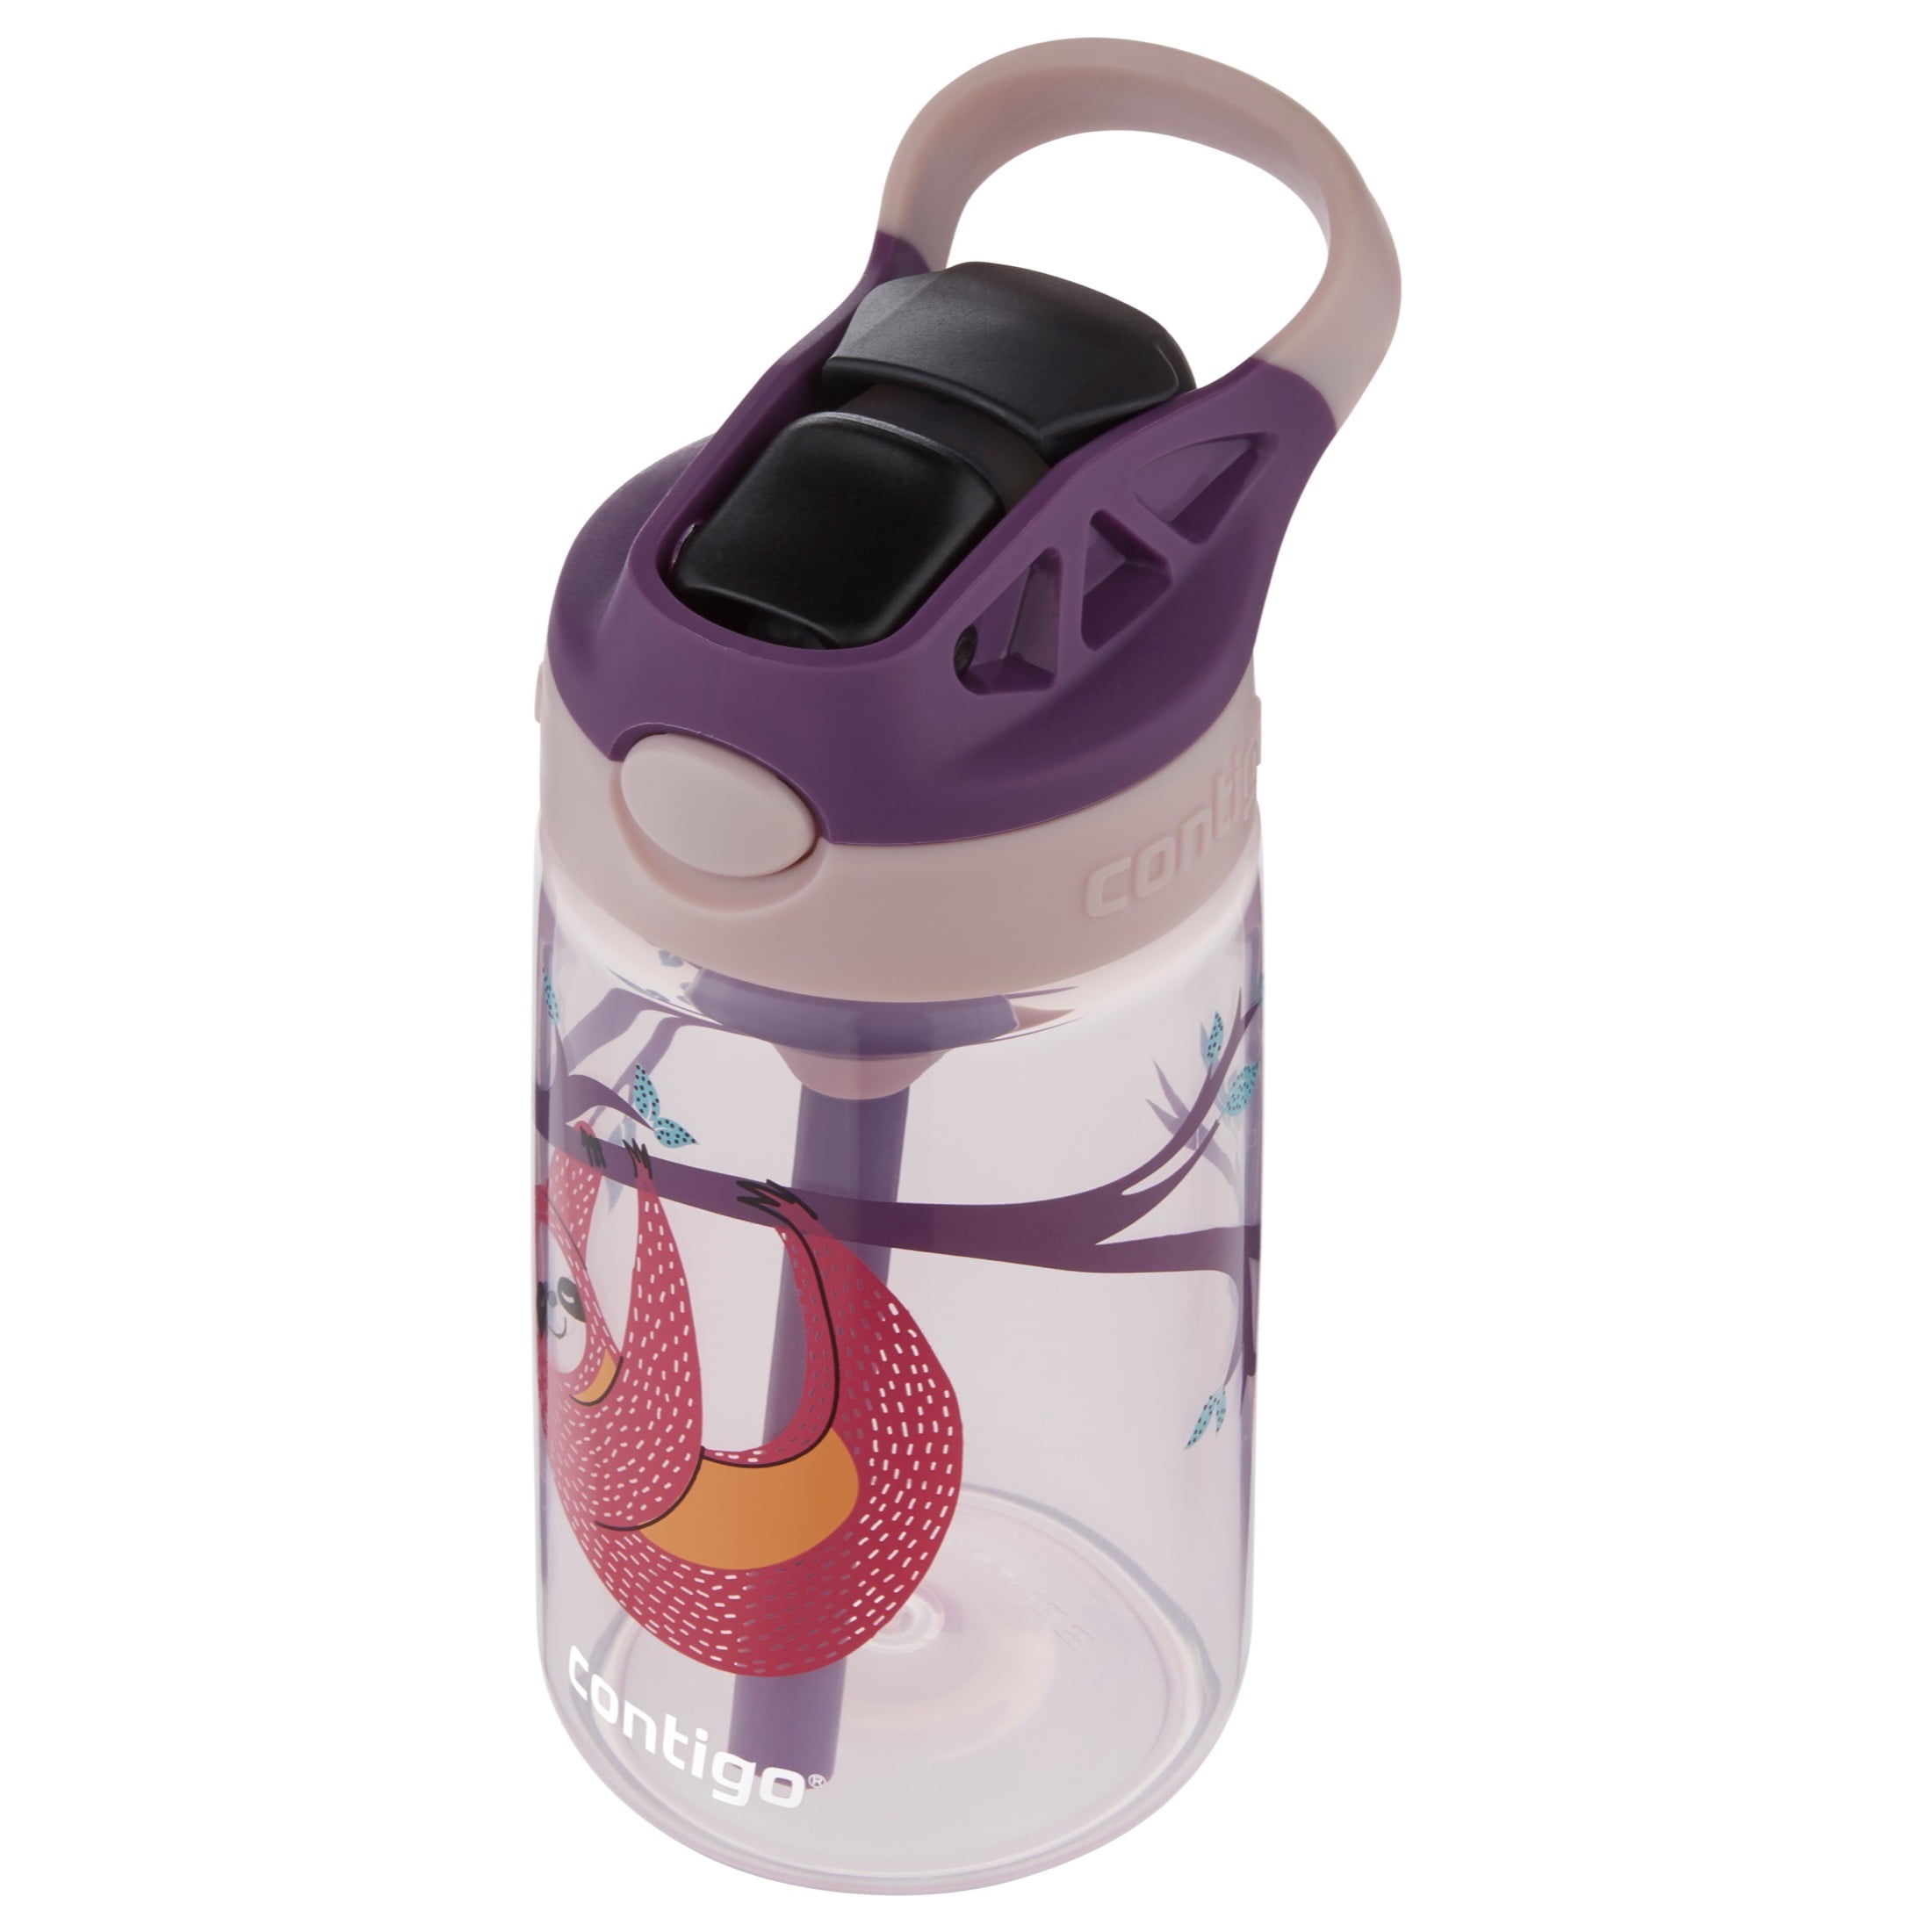 Contigo 14oz Kids' Water Bottle with Redesigned AutoSpout Straw Blue  Raspberry Azalea with Butterflies and Honeybee 1 ct